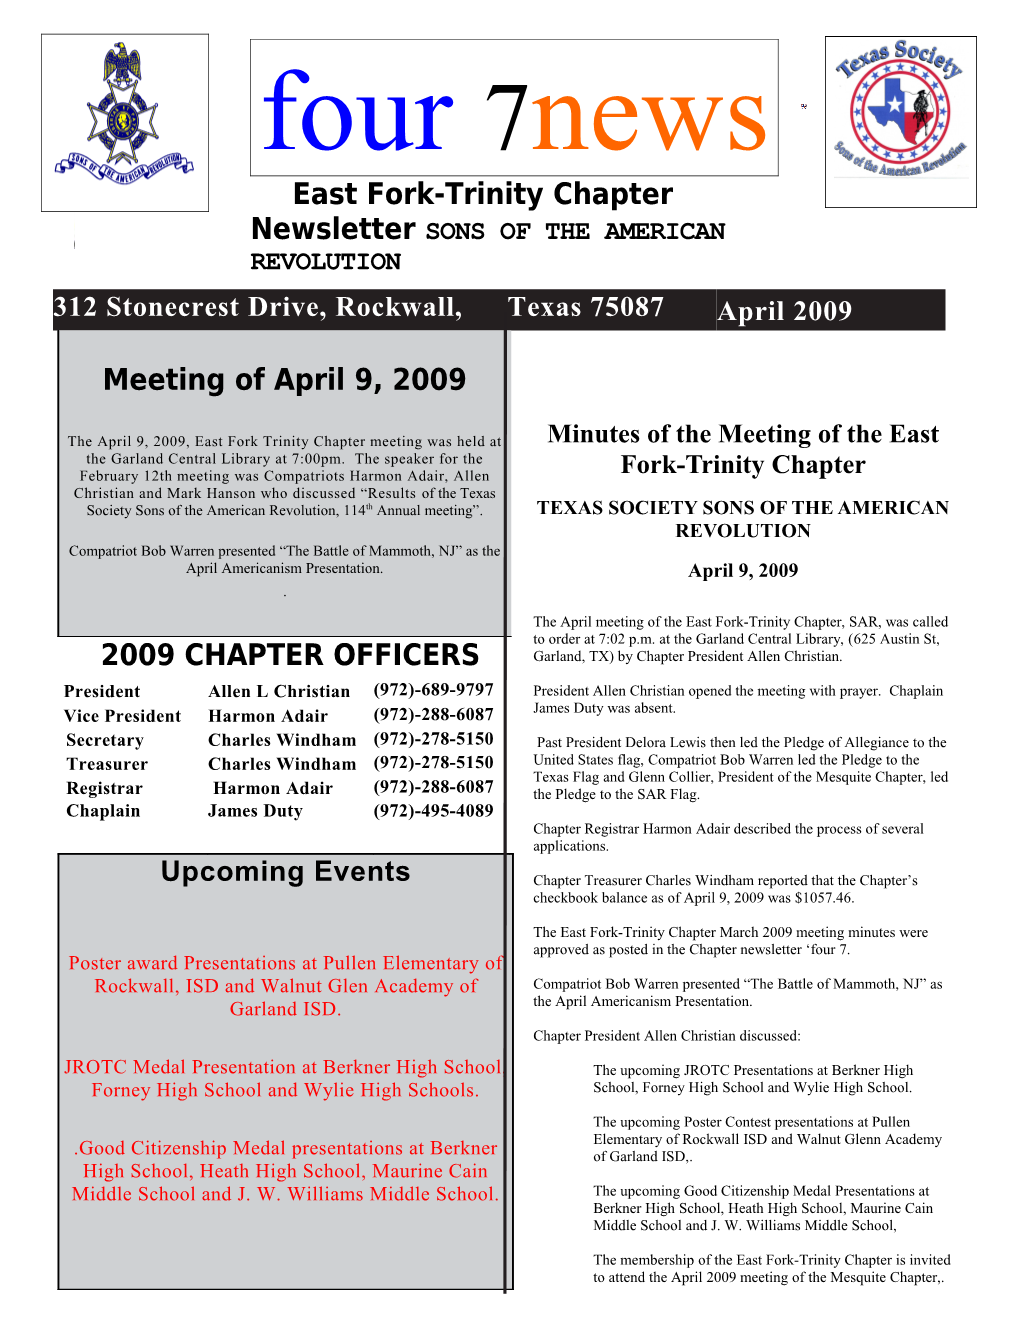 East Fork-Trinity Chapter Newsletter SONS of the AMERICAN REVOLUTION